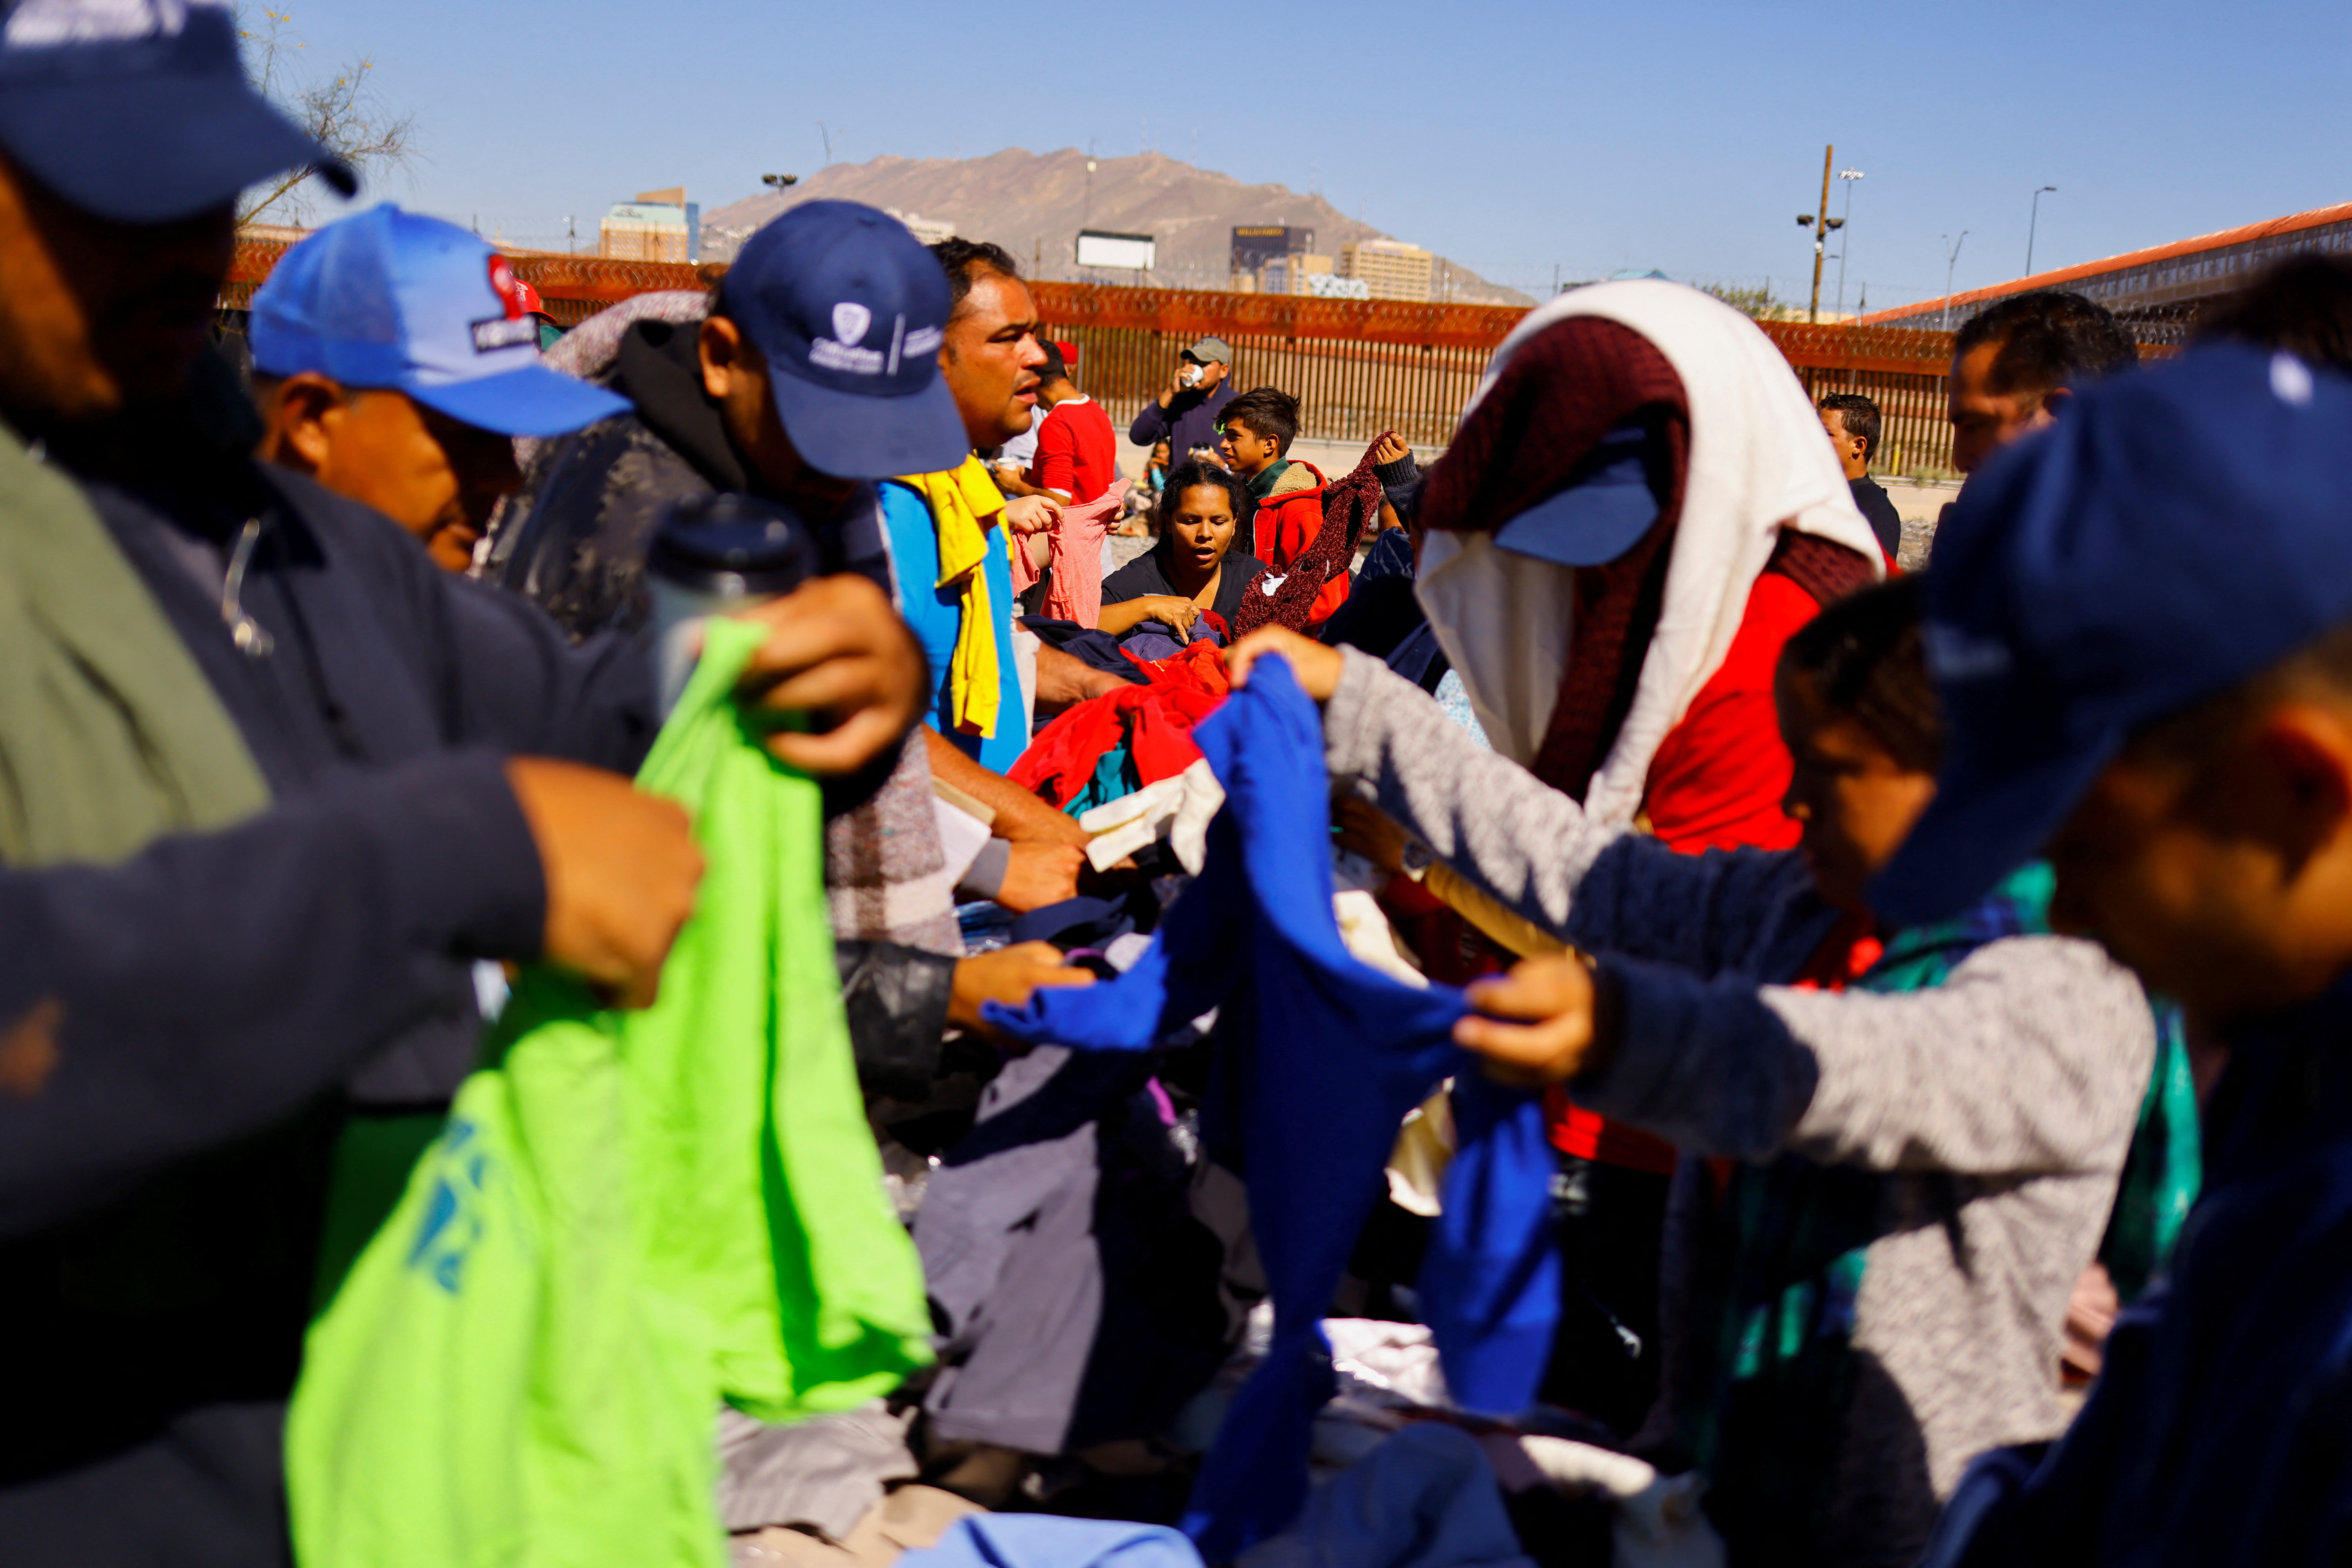 Venezuelan migrants are in Ciudad Juarez after the new immigration policies of the United States